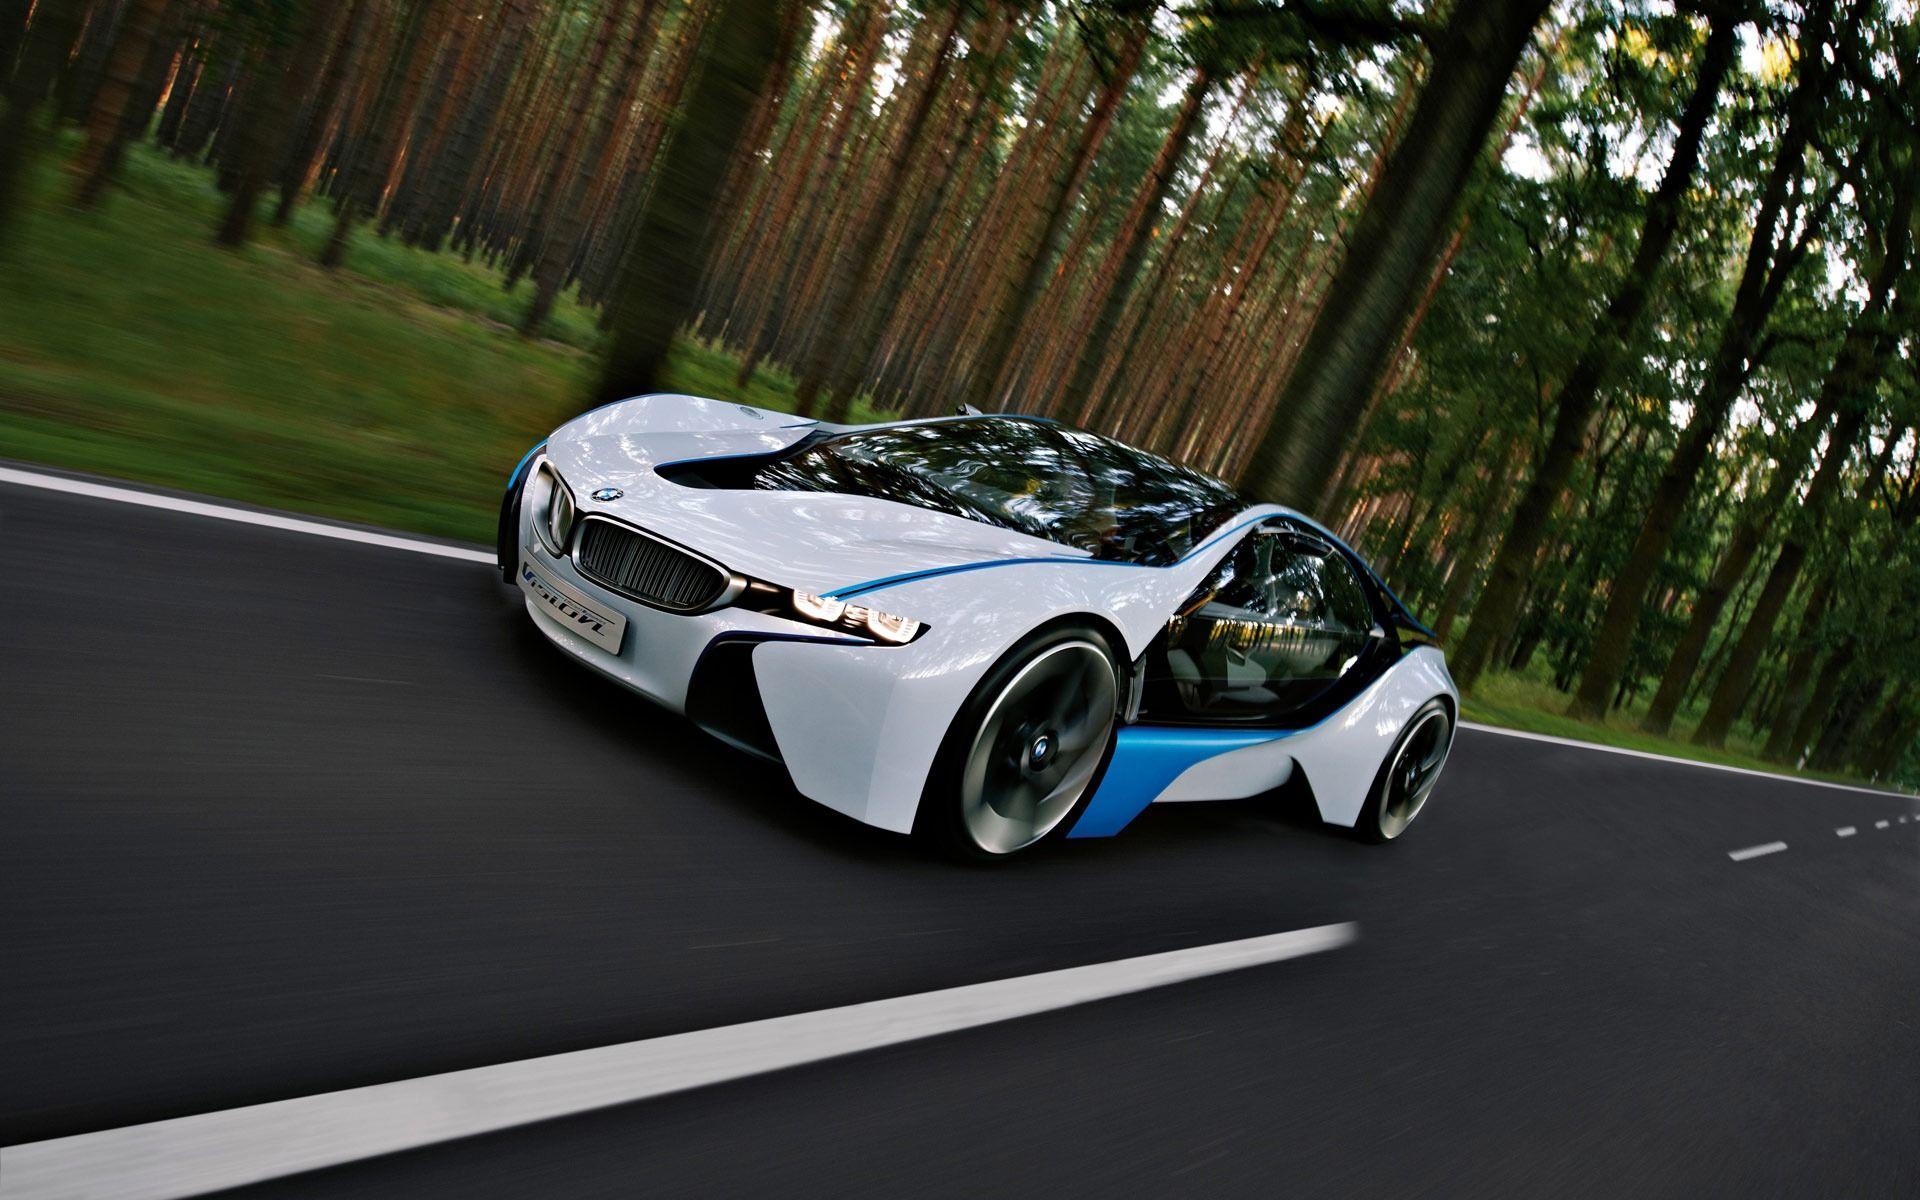 BMW Vision Wallpaper BMW Cars Wallpaper in jpg format for free download